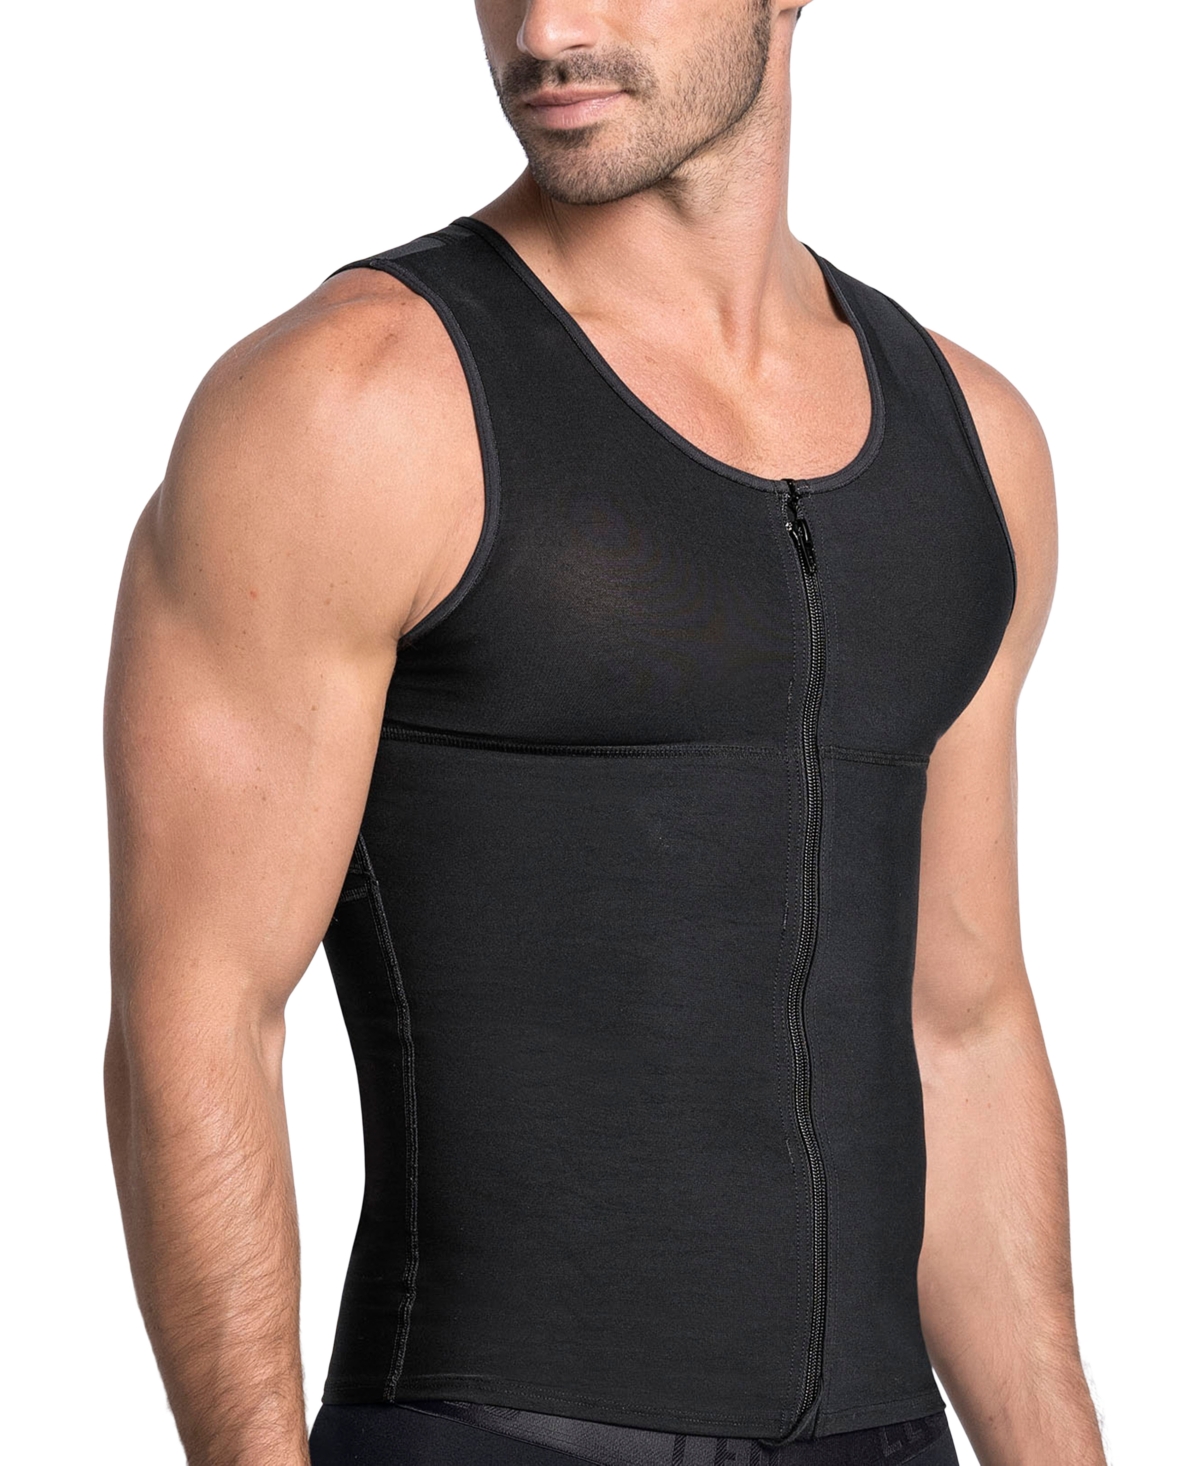 Abs Slimming With Back Support - Black